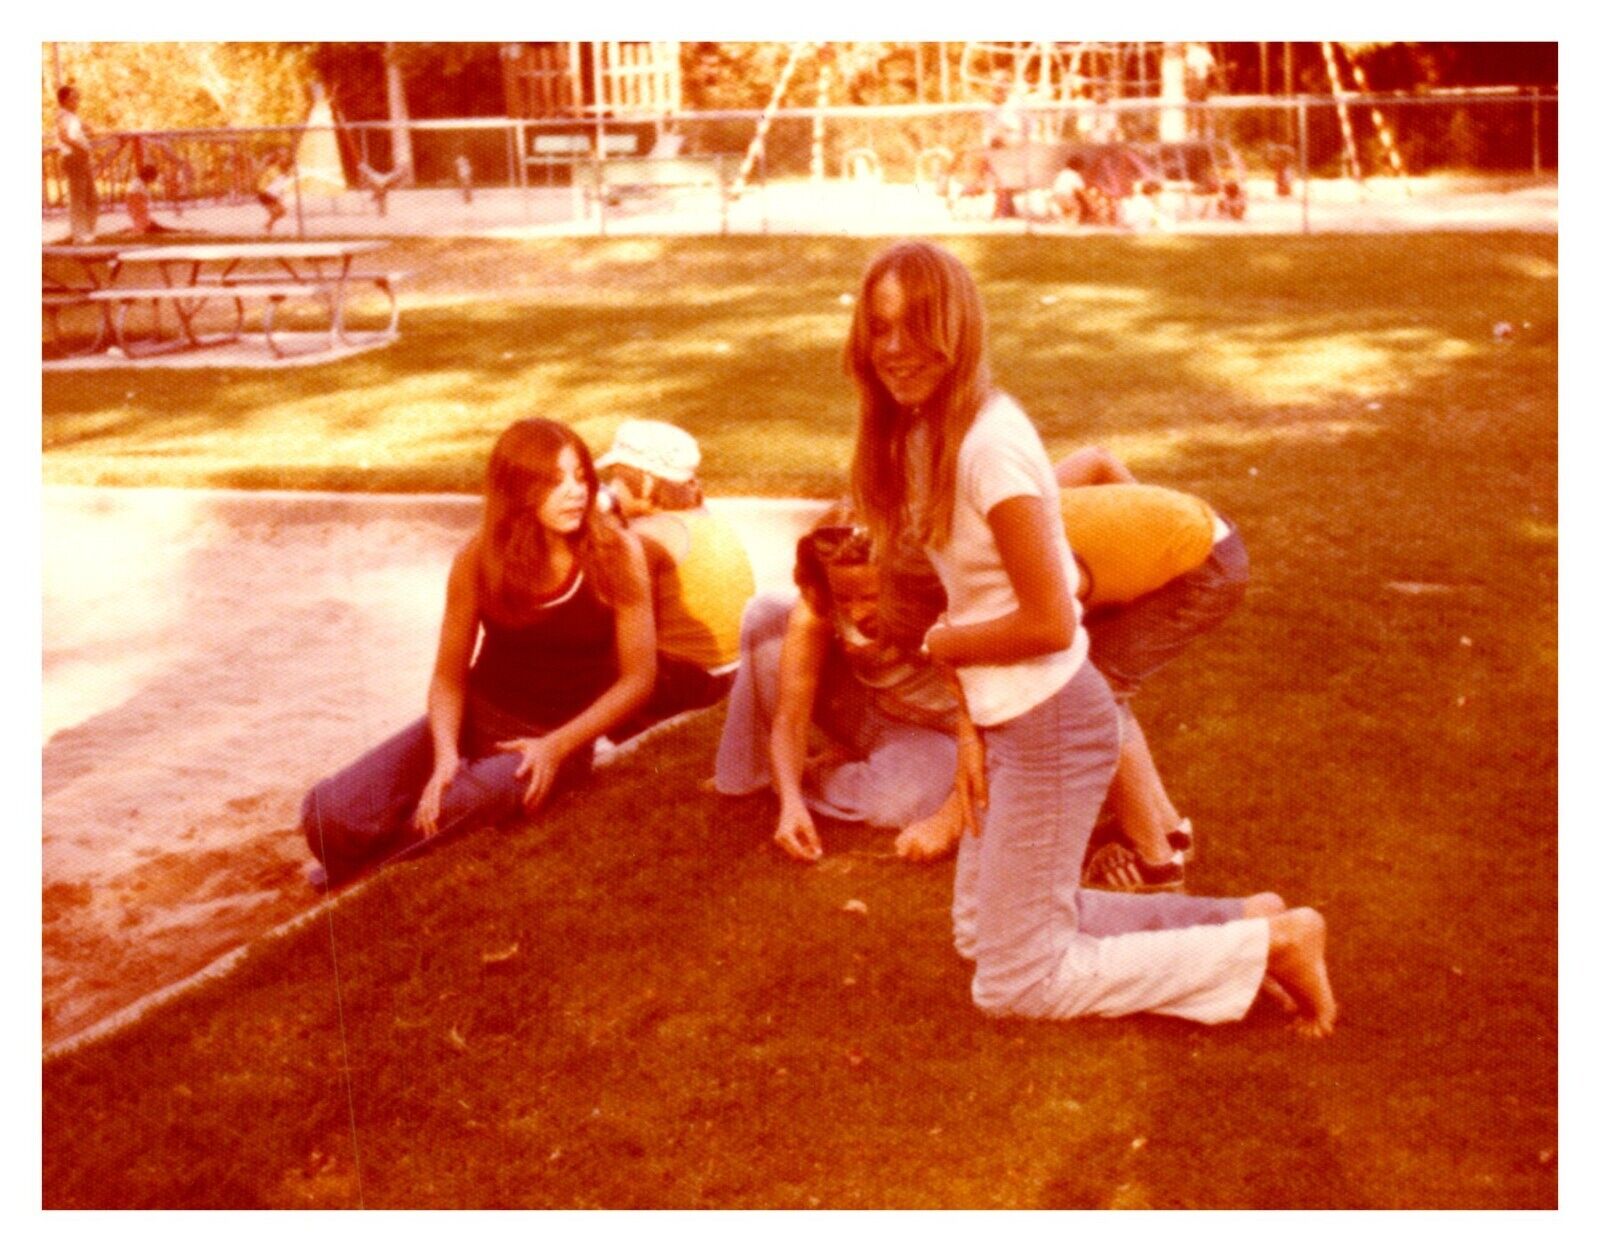 1970s Teen Girl Playing Outside  Vintage Photo California